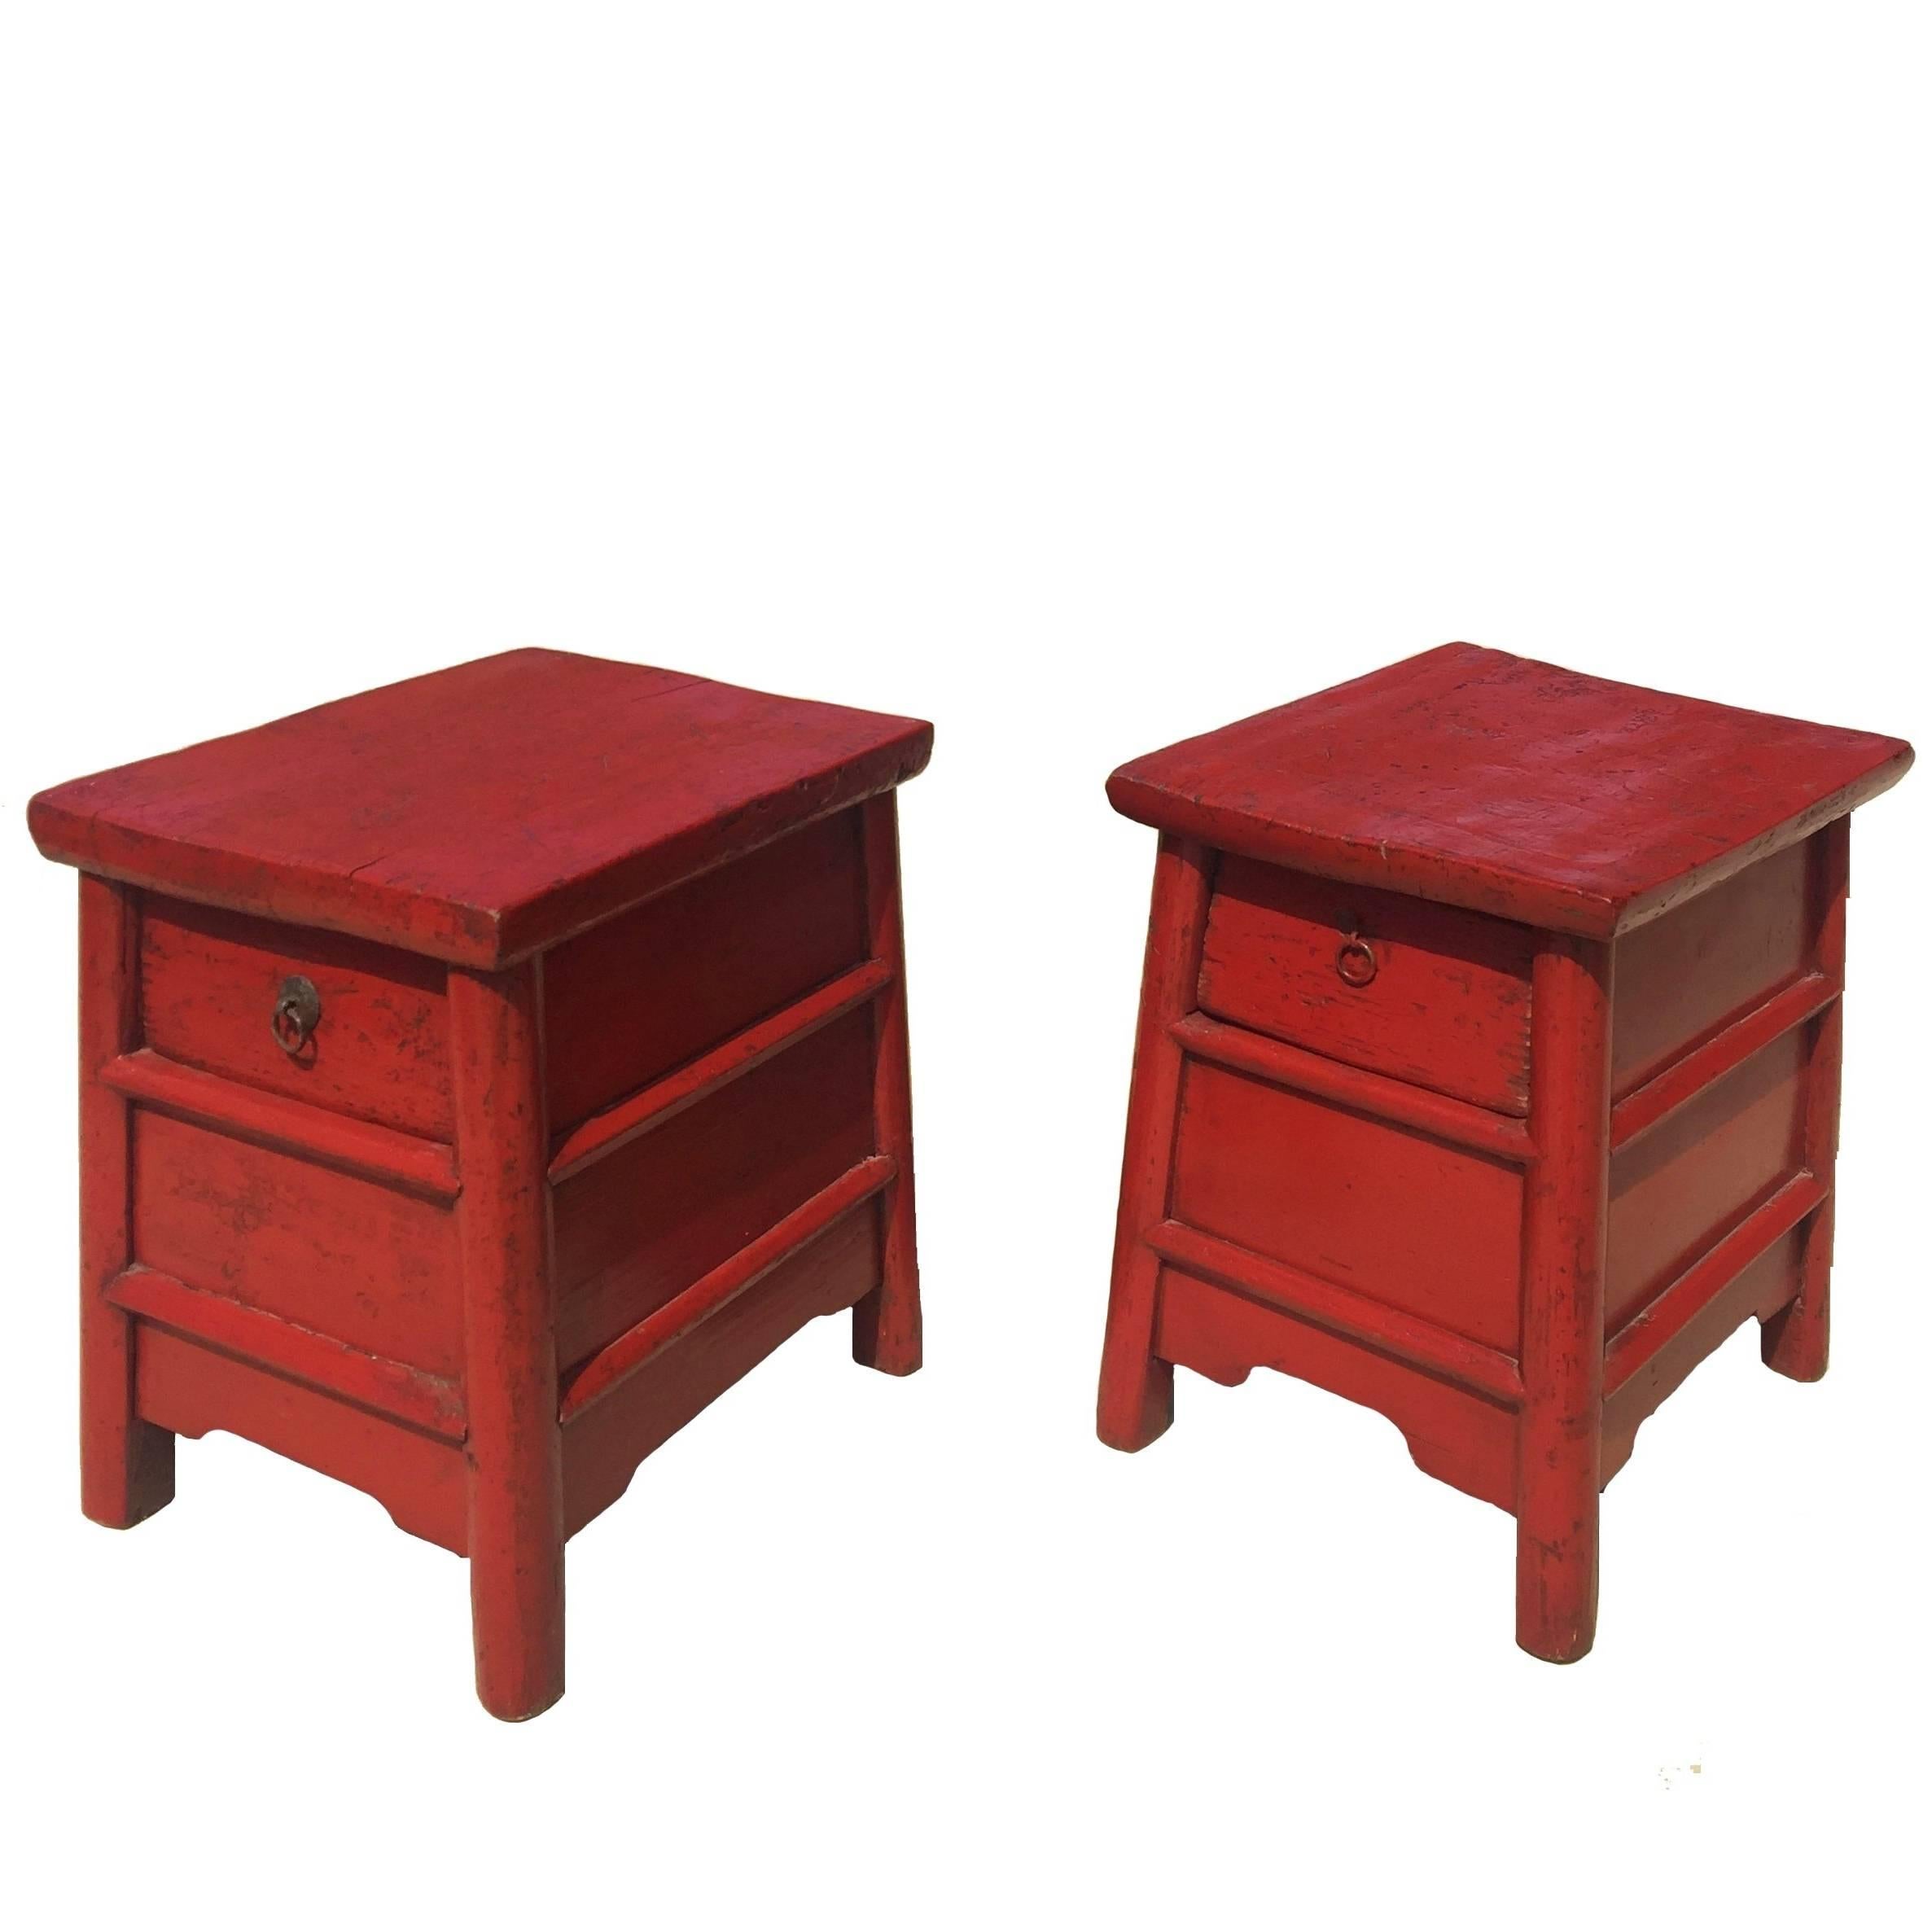 Pair of 19th Century Red Lacquer Country Stools, Chinese Antique Stools